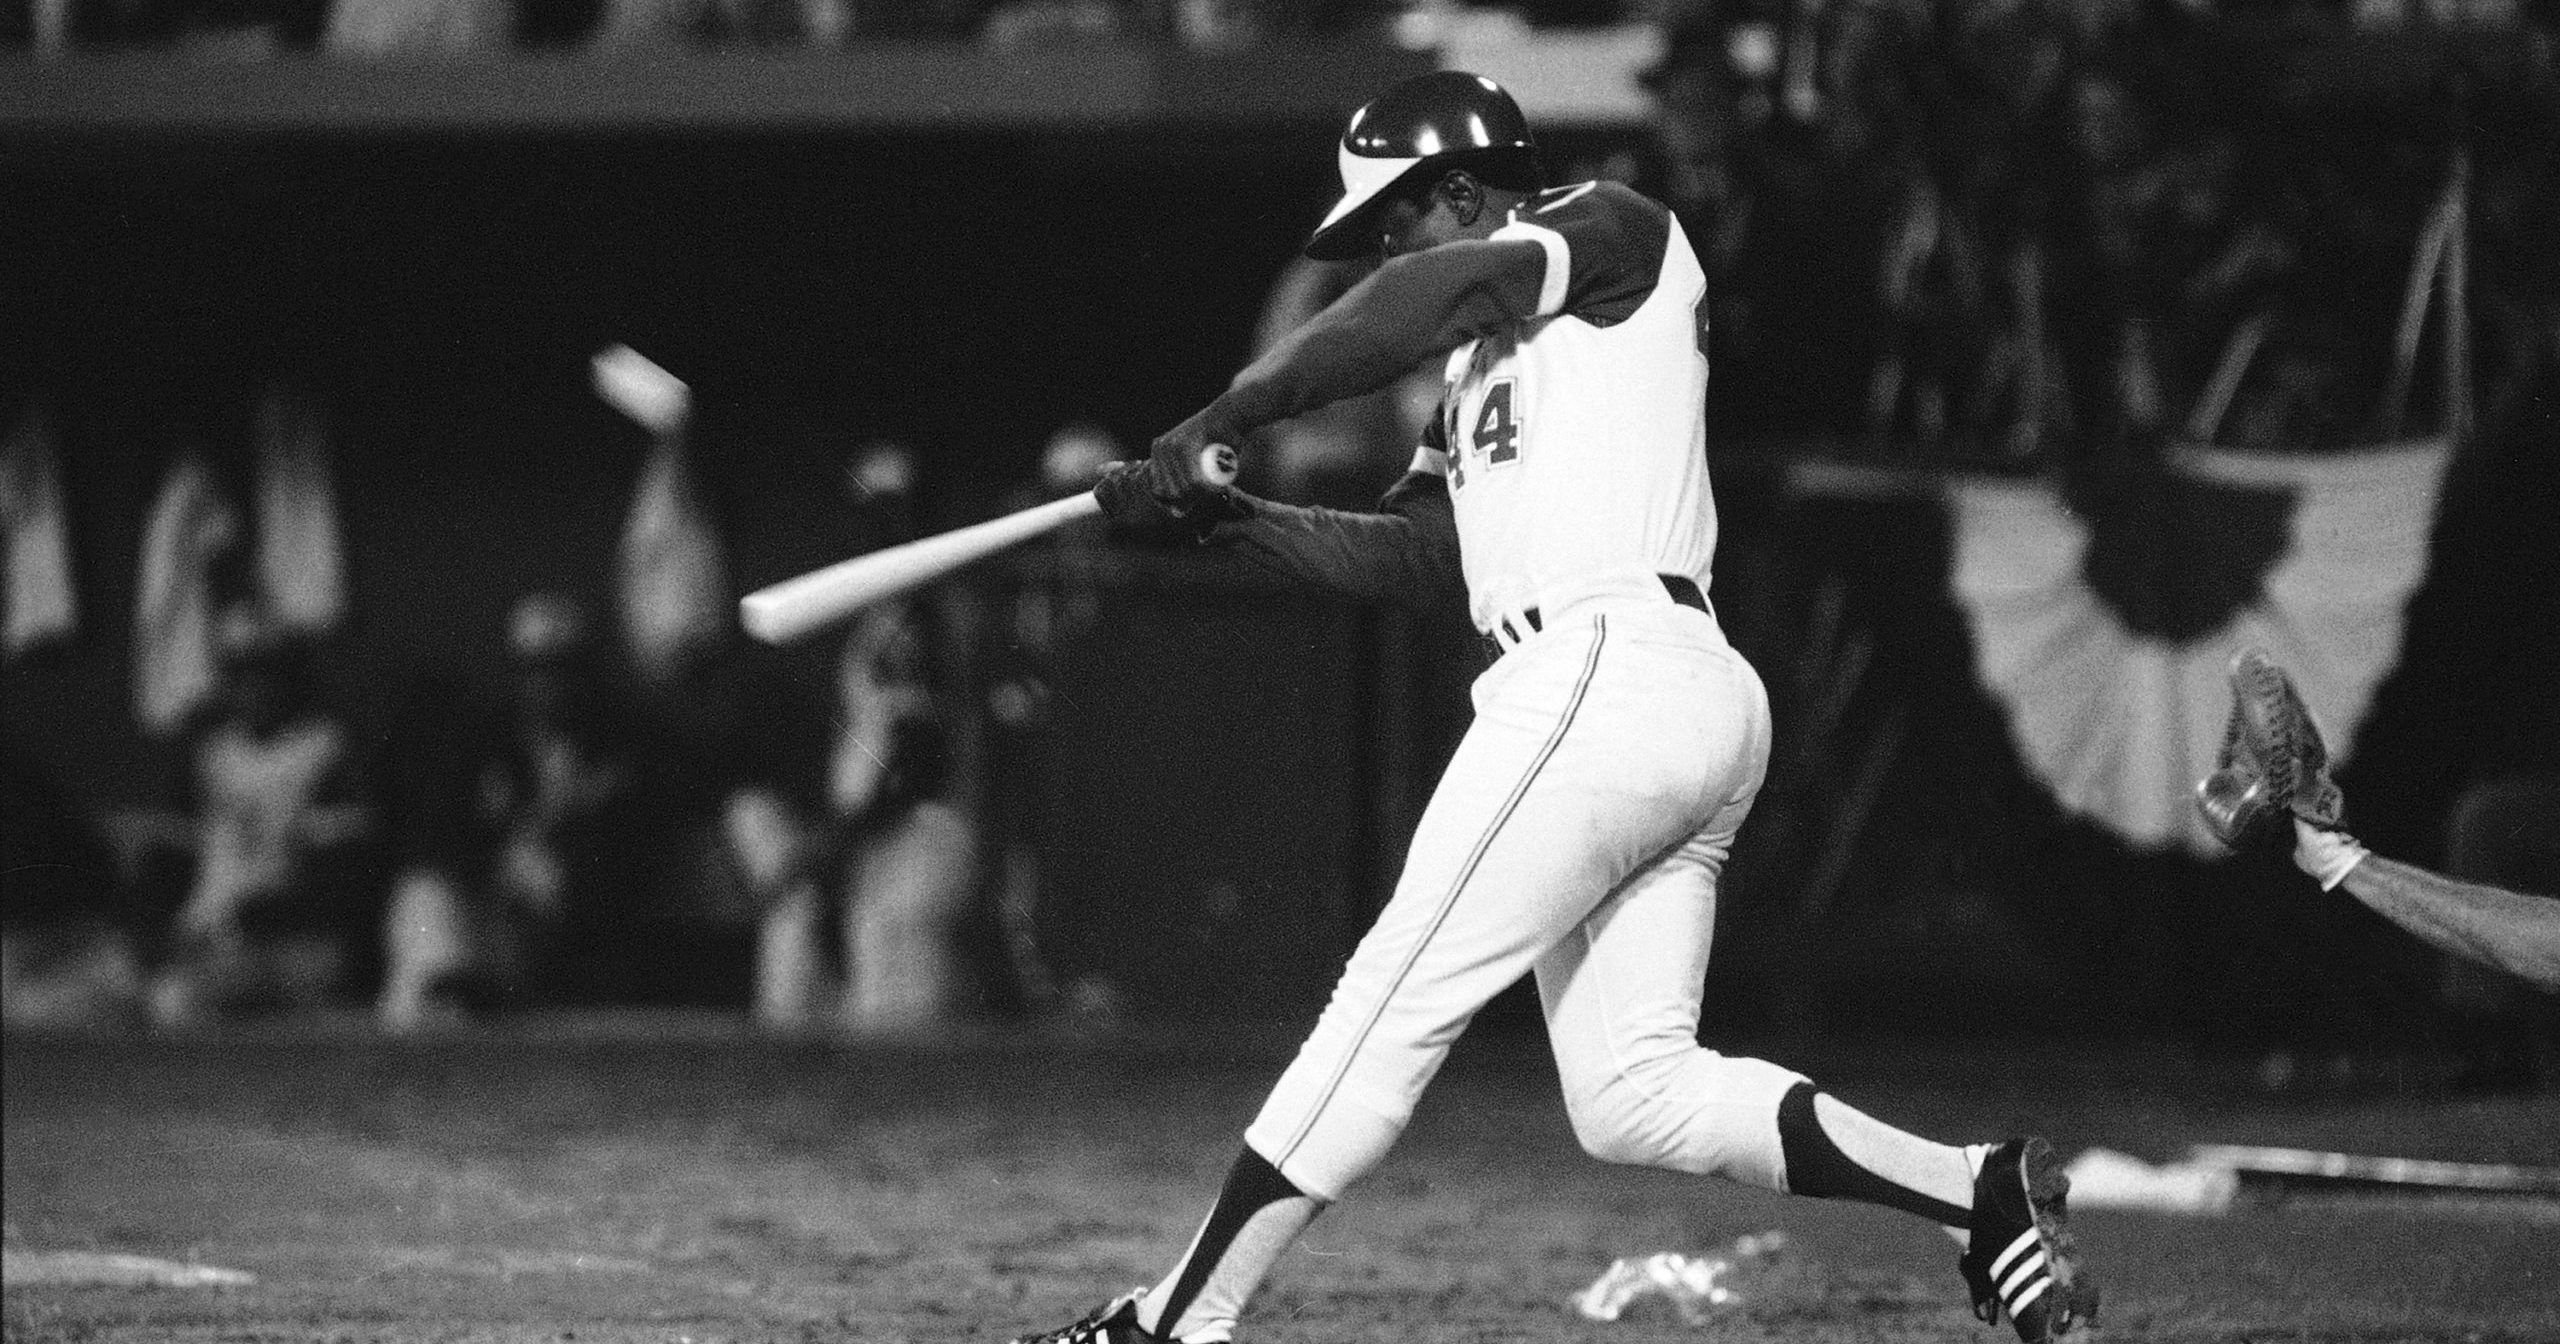 Hank Aaron hits his 715th career home run in Atlanta Stadium to break the all-time record on April 8, 1974.